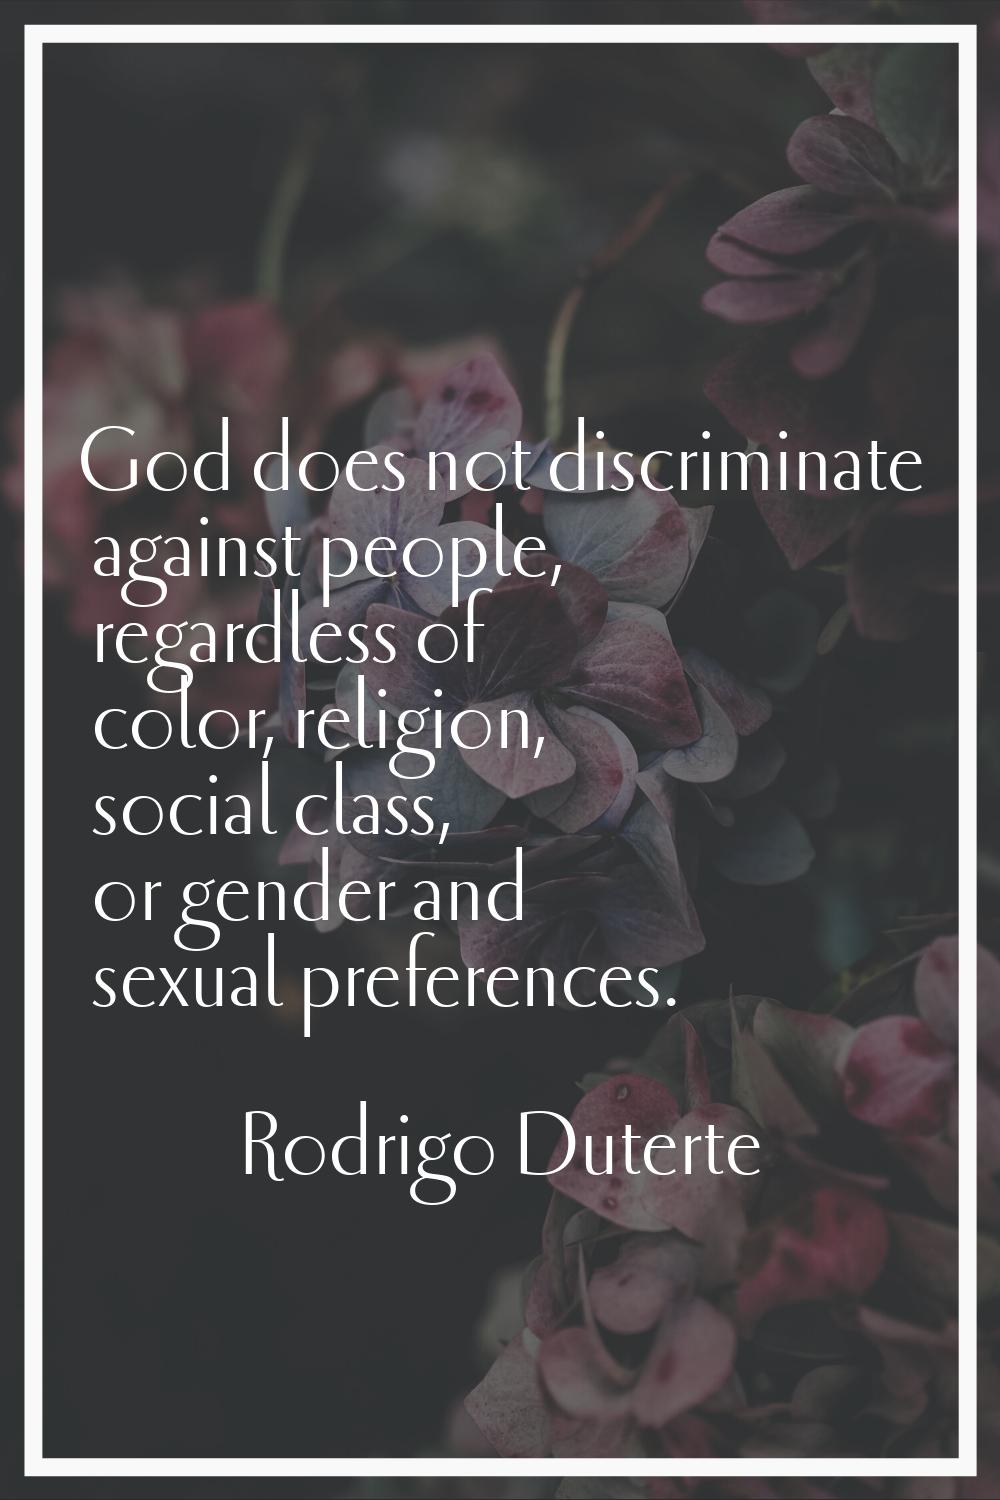 God does not discriminate against people, regardless of color, religion, social class, or gender an